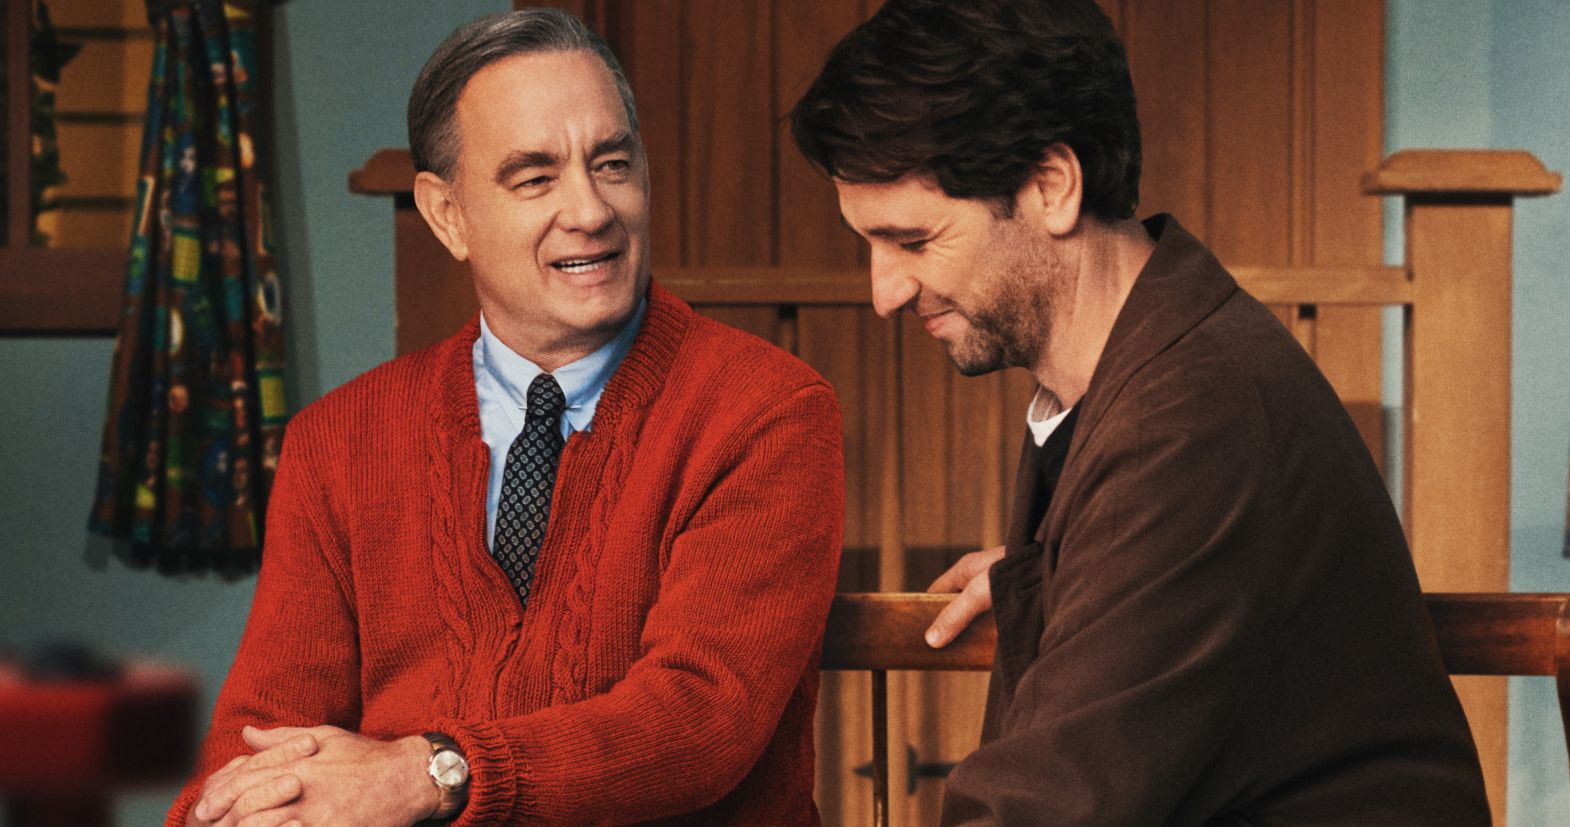 A Beautiful Day in the Neighborhood Review: A Heartfelt Tribute to Mister Rogers' Legacy